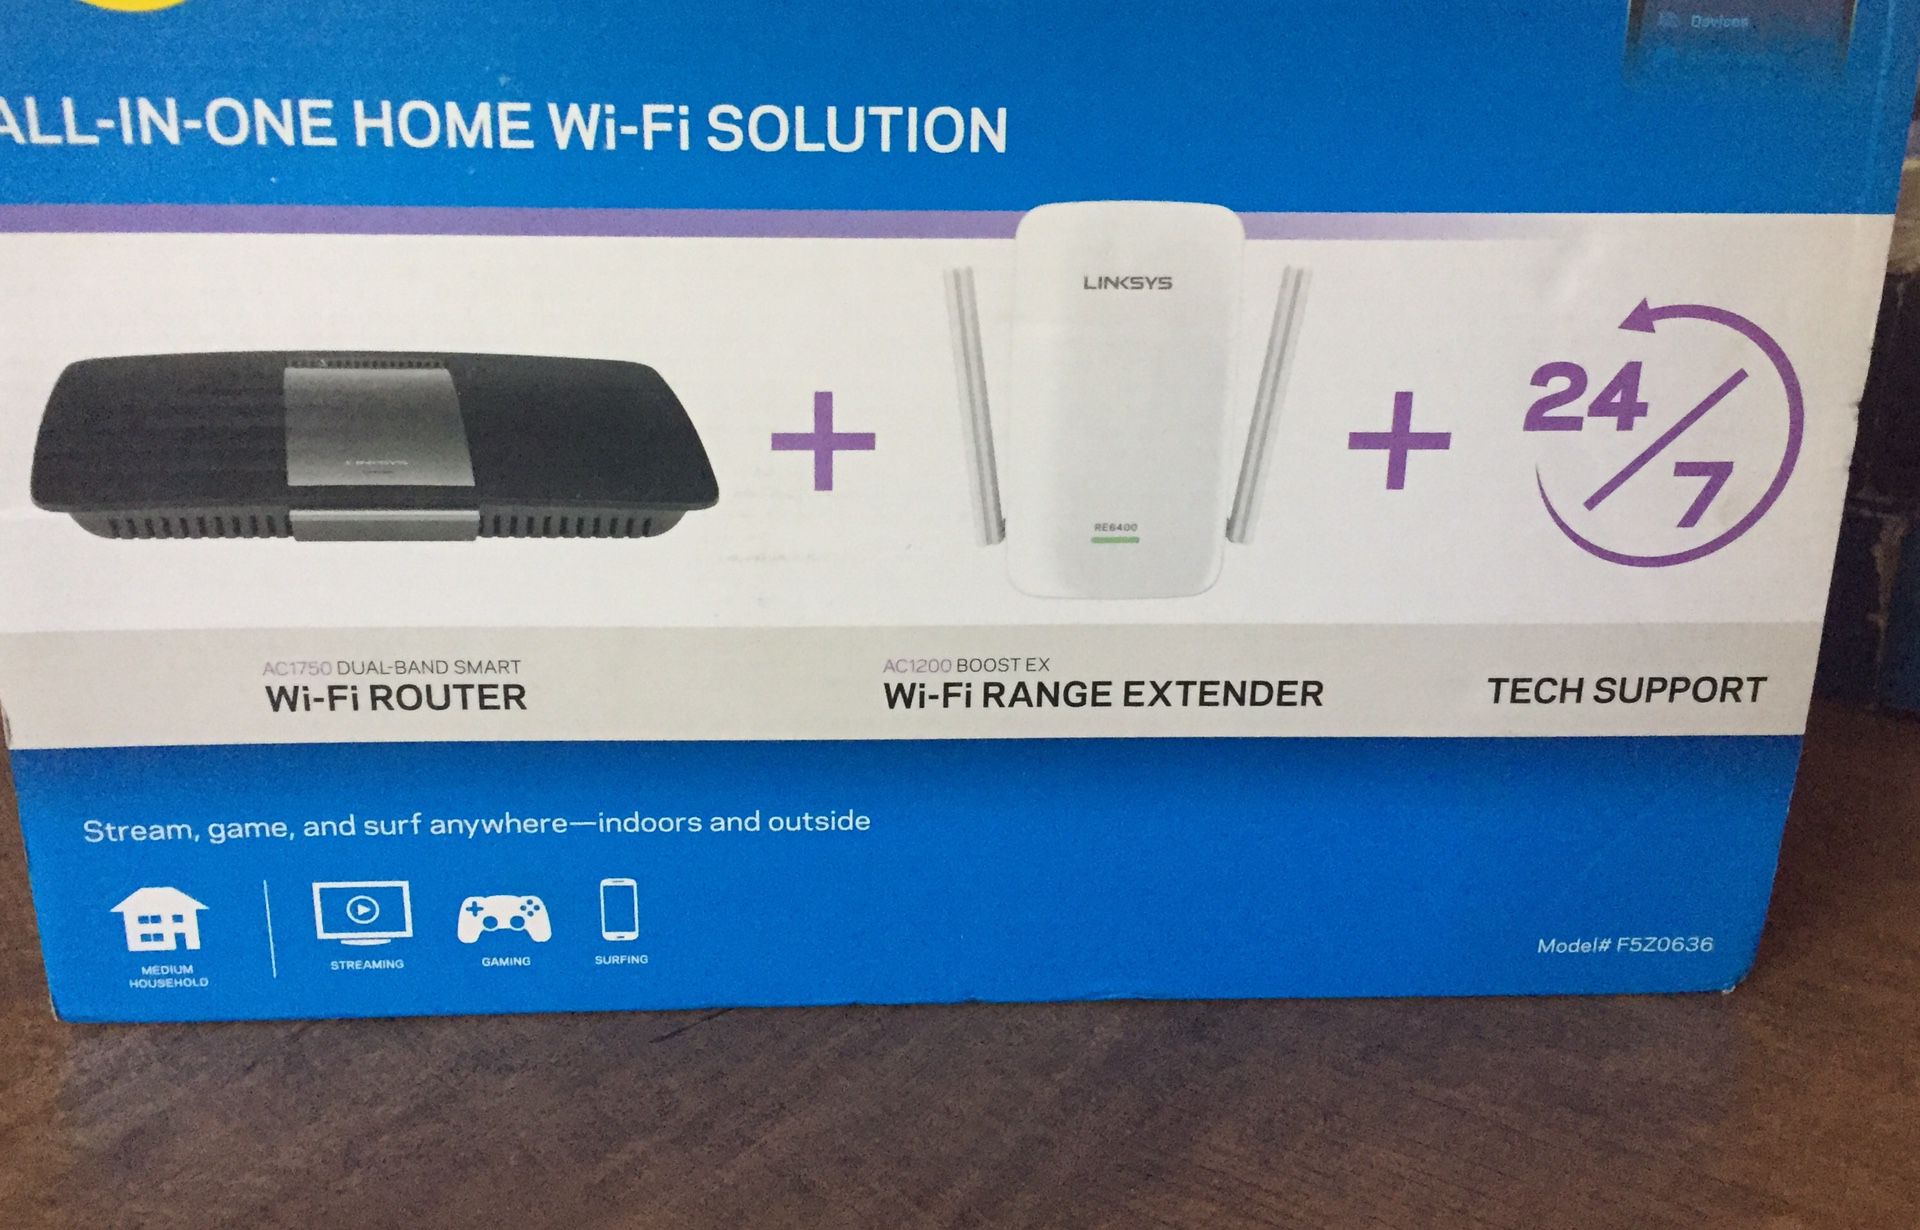 All in one WiFi router and range extender